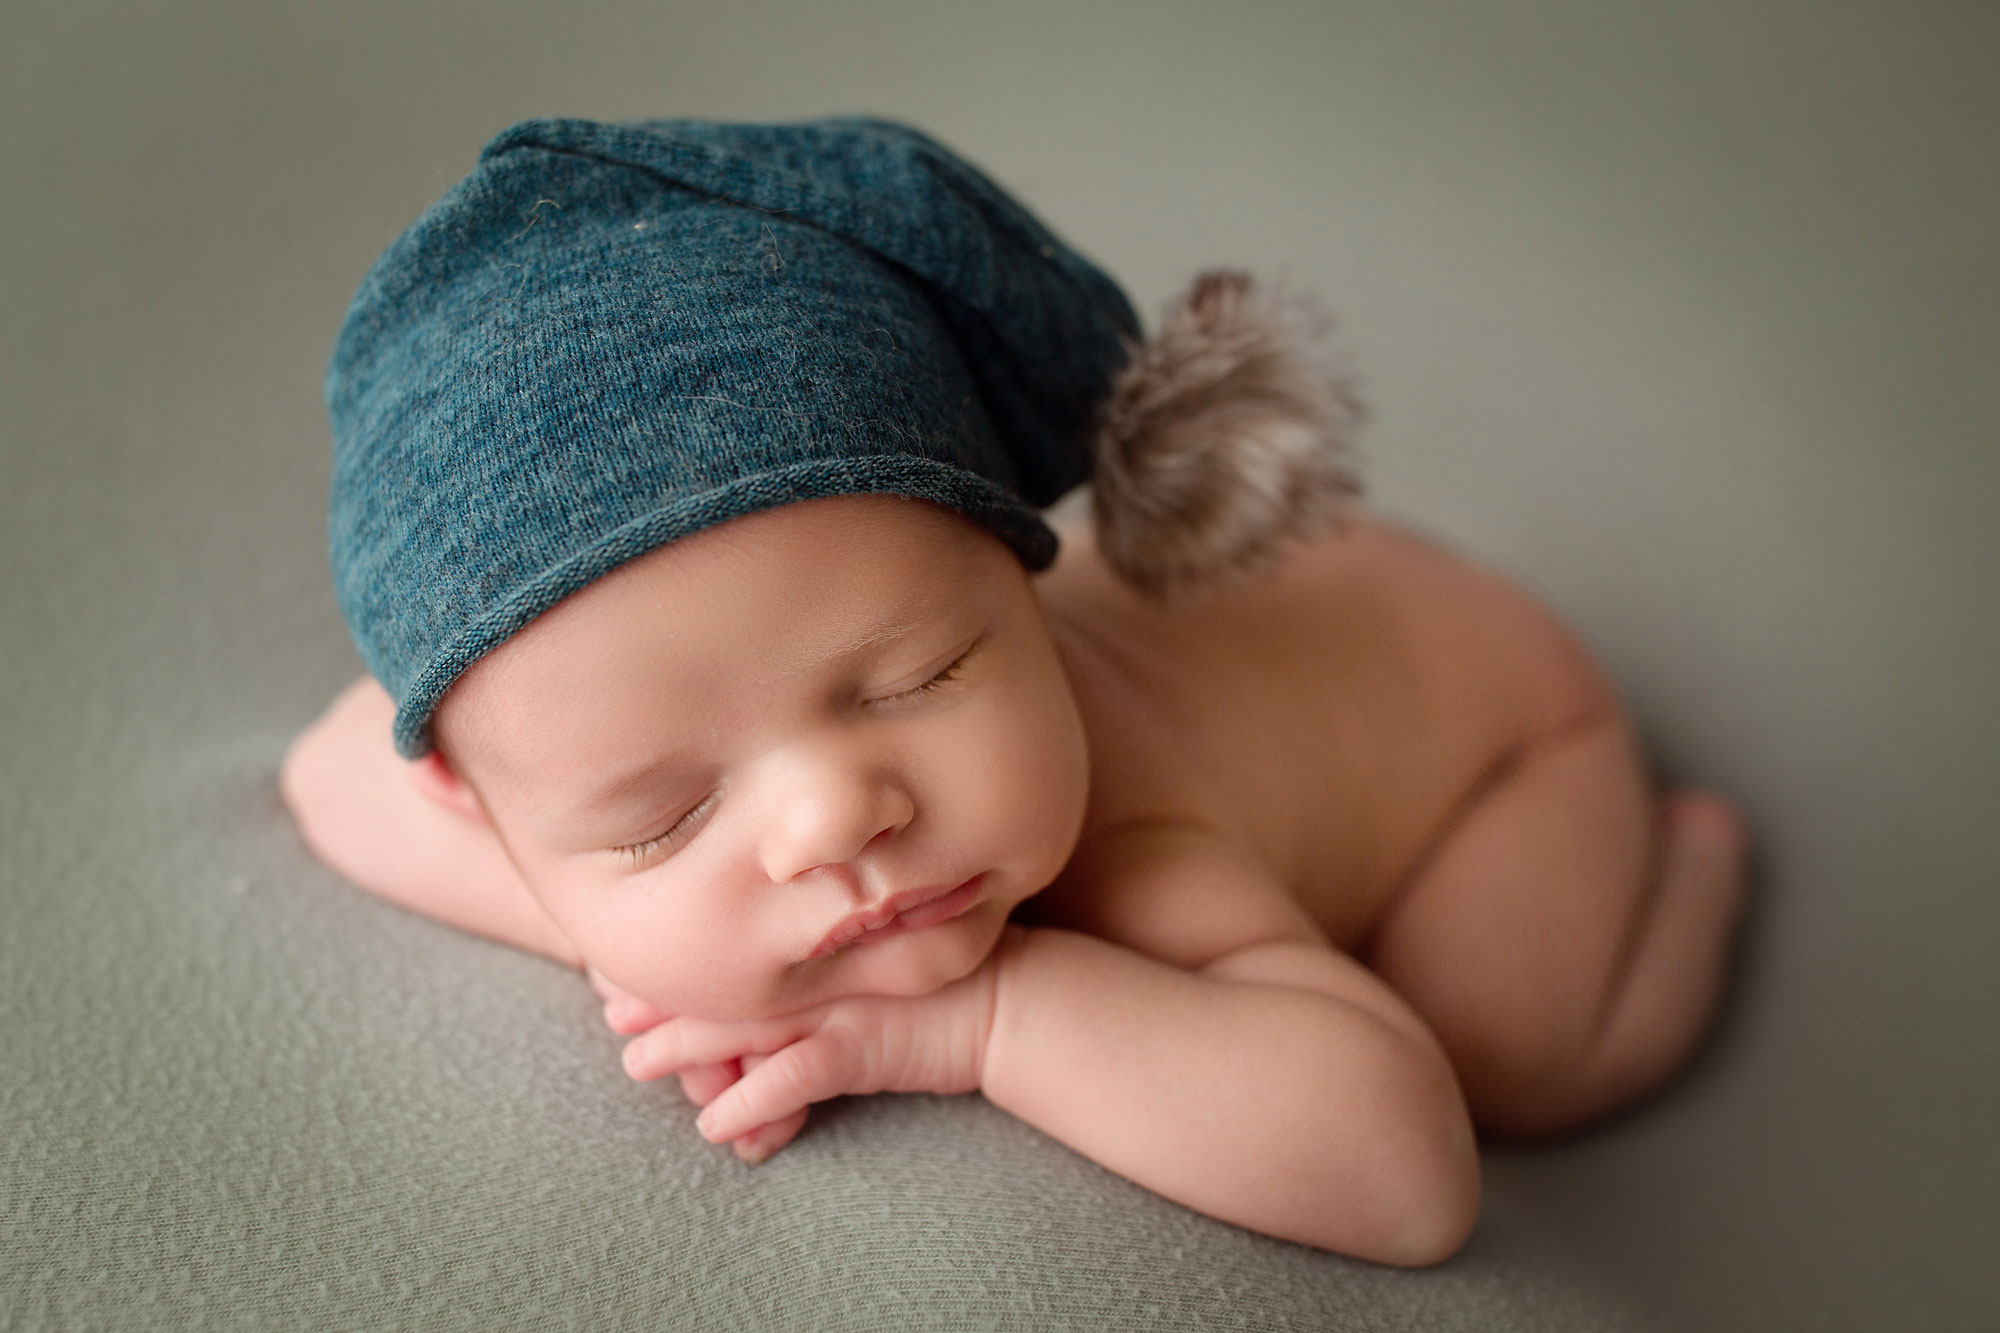 newborn photographer monmouth county, baby boy asleep on gray background in blue cap